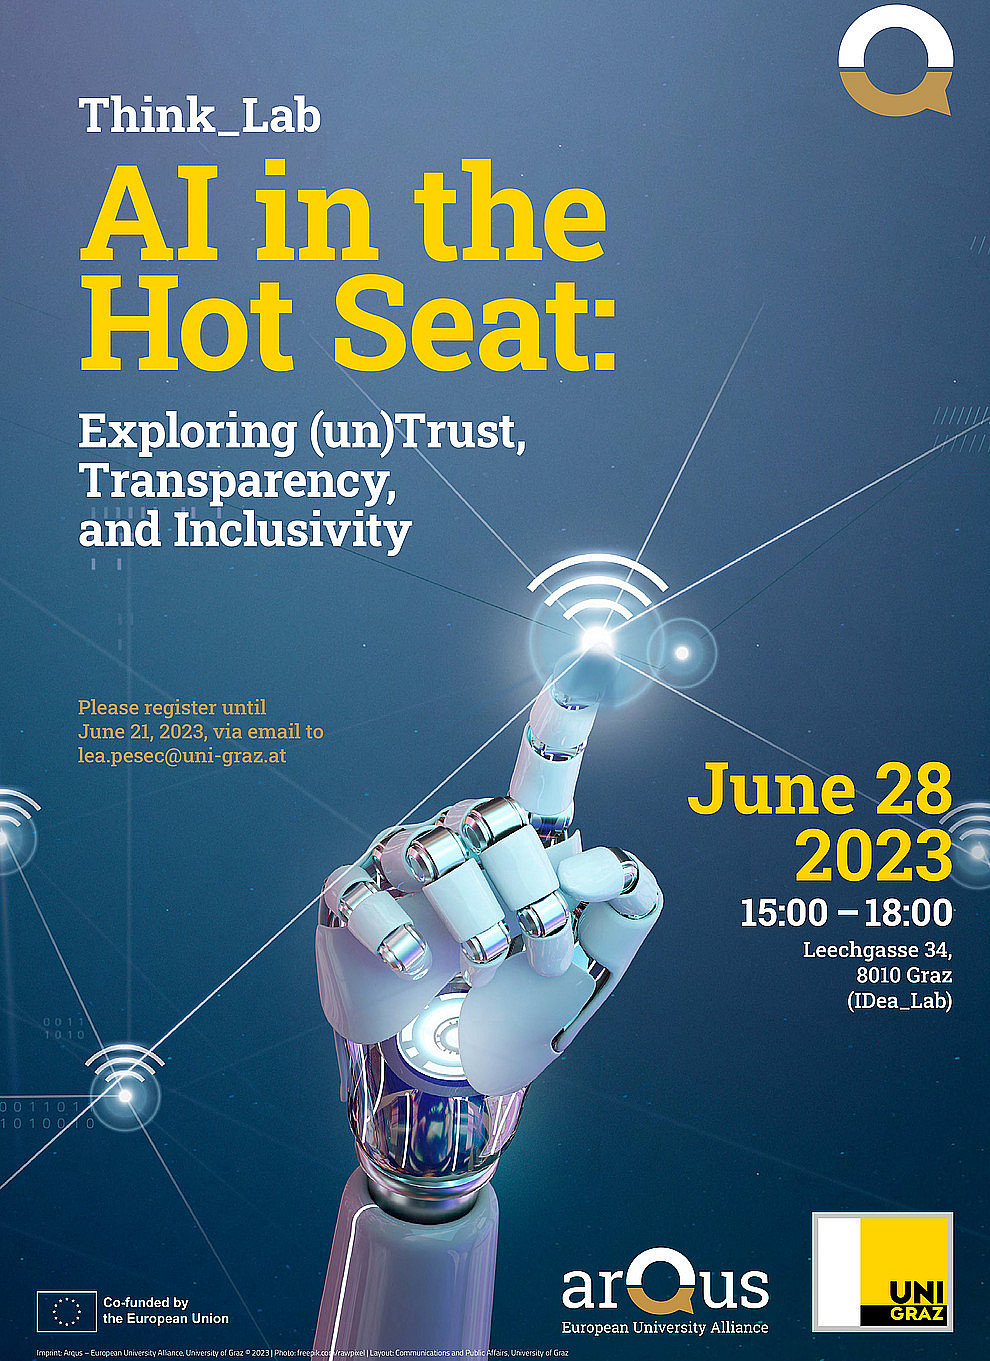 AI in the Hot Seat. Event on June 28th 2023. 